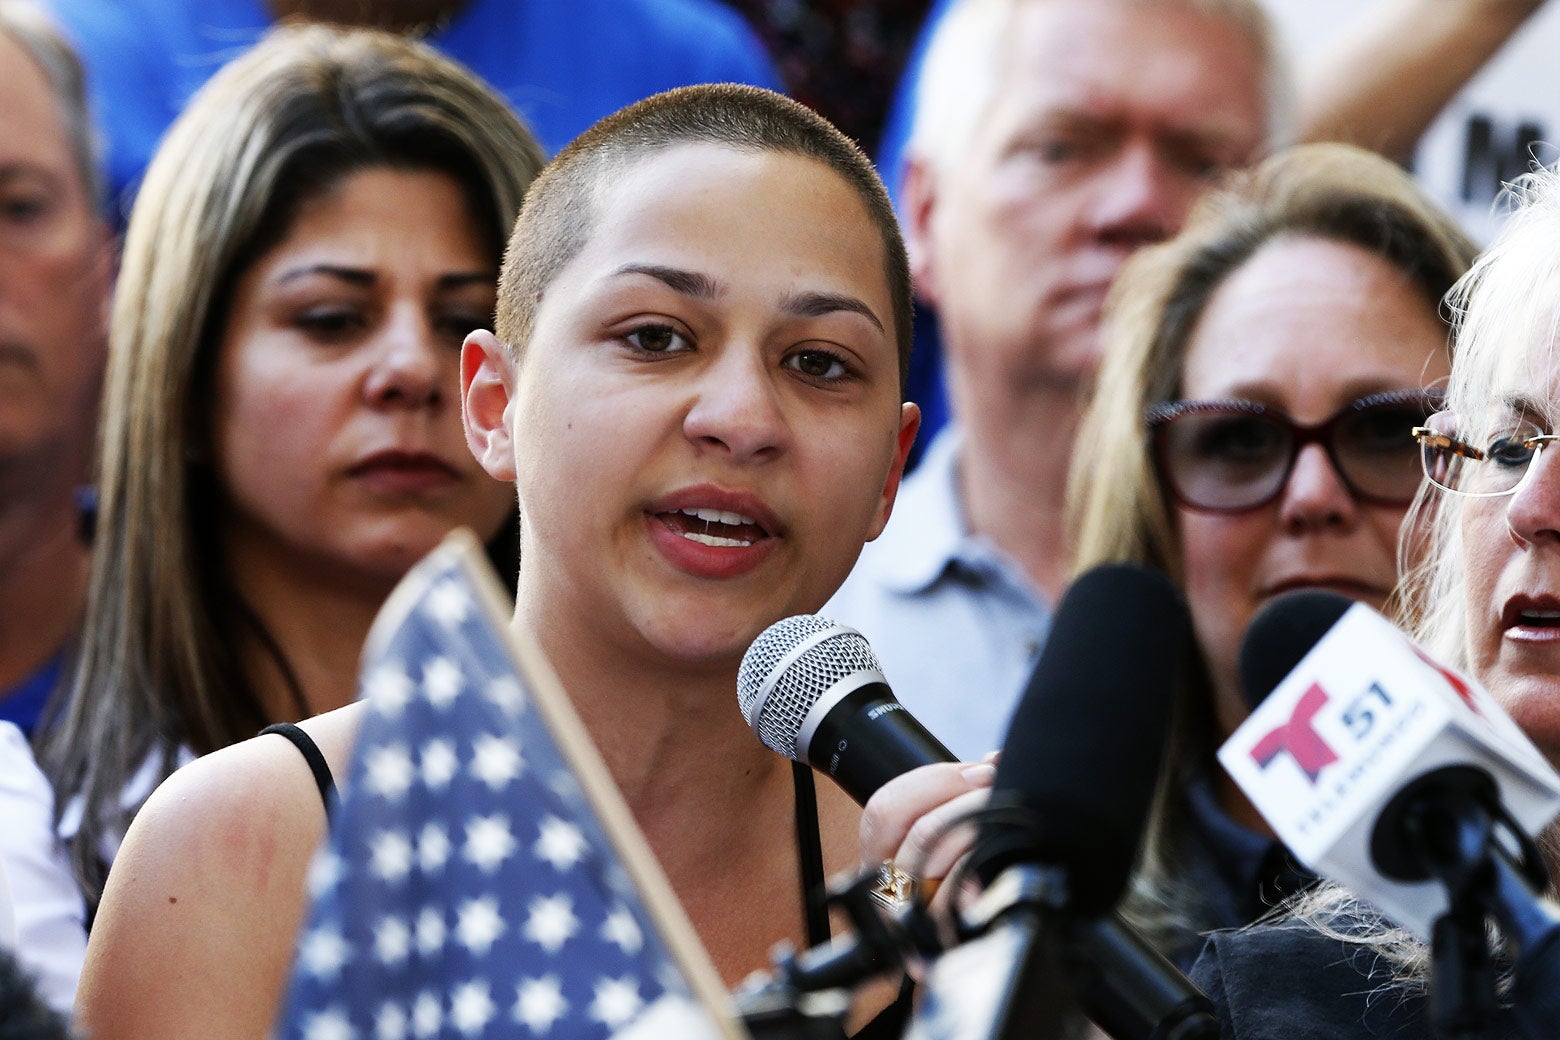 Marjory Stoneman Douglas High School student Emma González gives a speech at a rally for gun control at the Broward County Federal Courthouse in Fort Lauderdale, Florida, on Feb. 17.